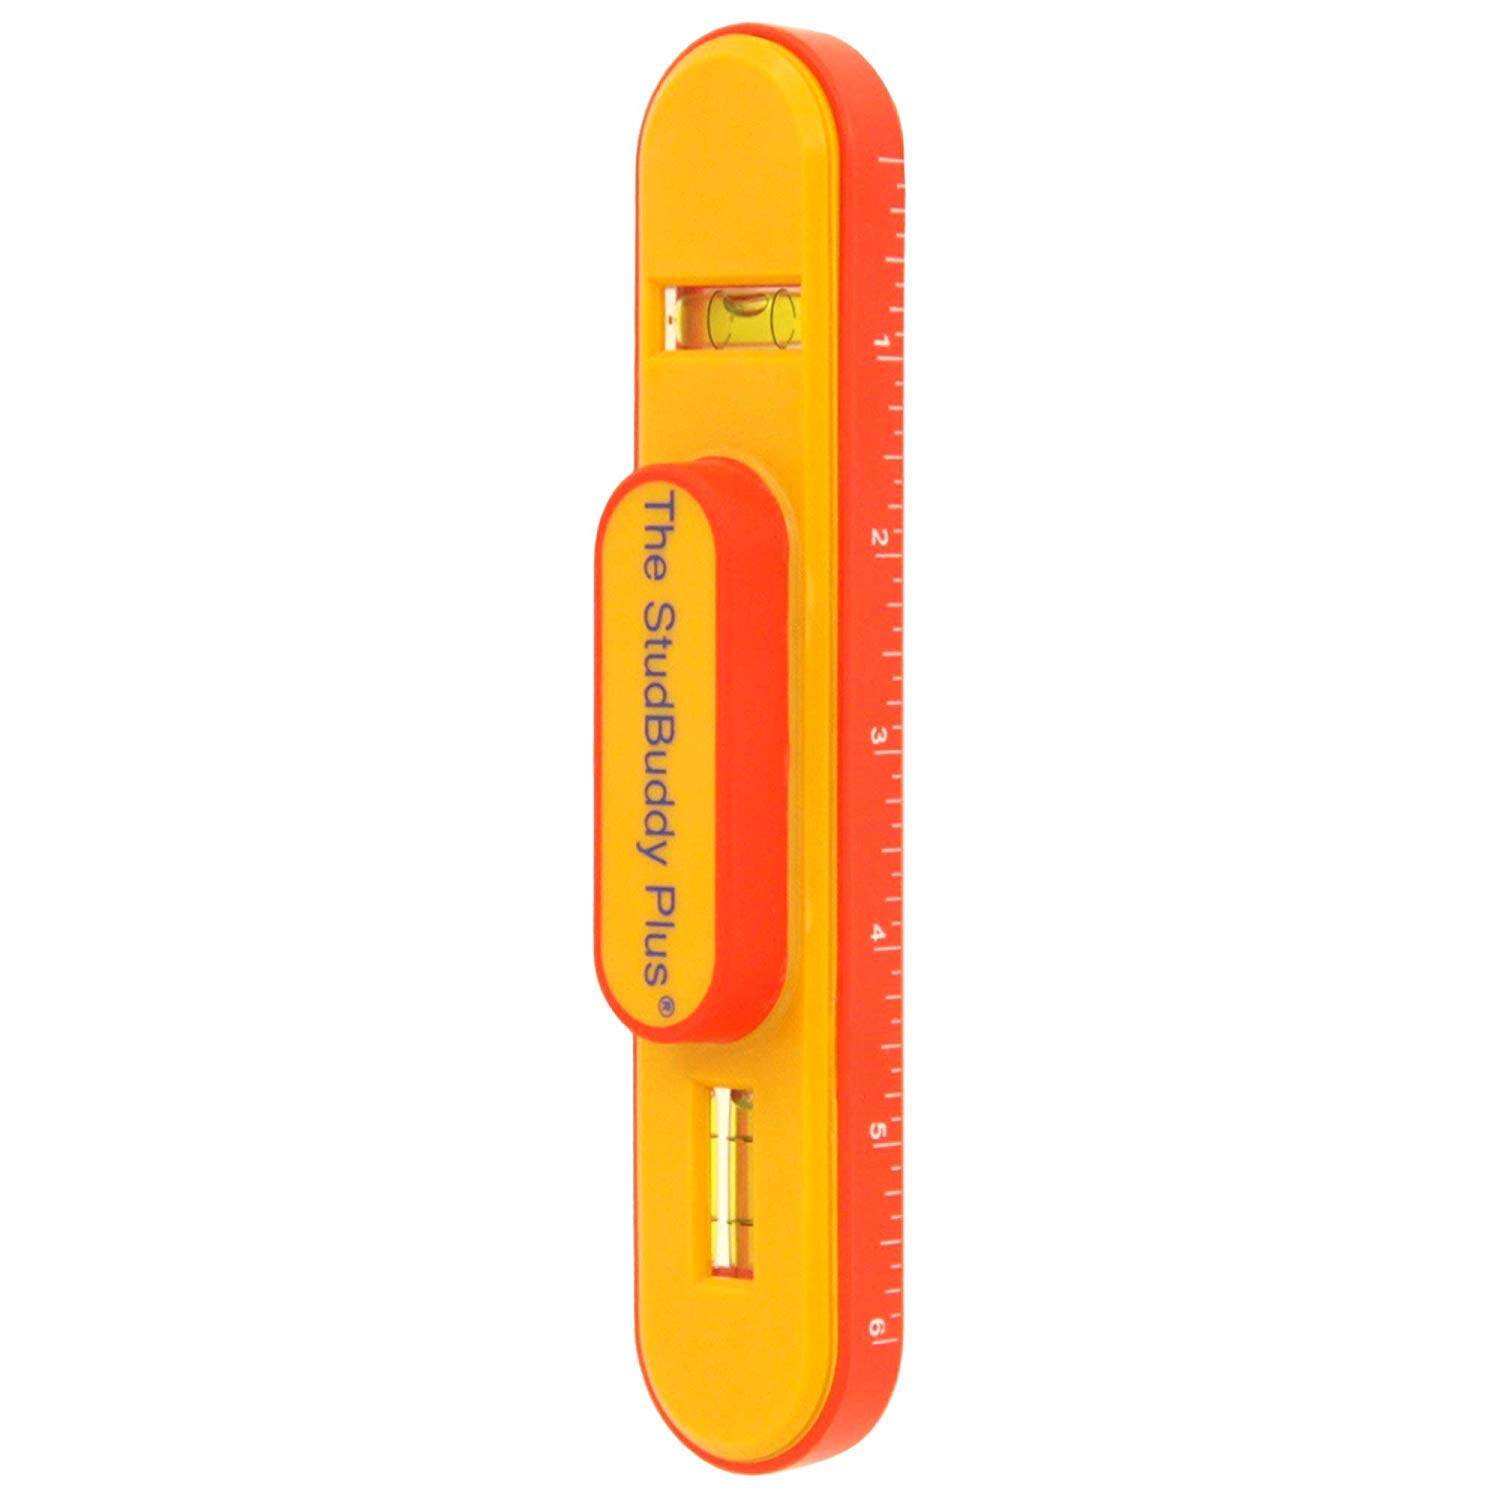 Magnetic Stud Finder - The StudBuddy® - Shakespeare Solutions™